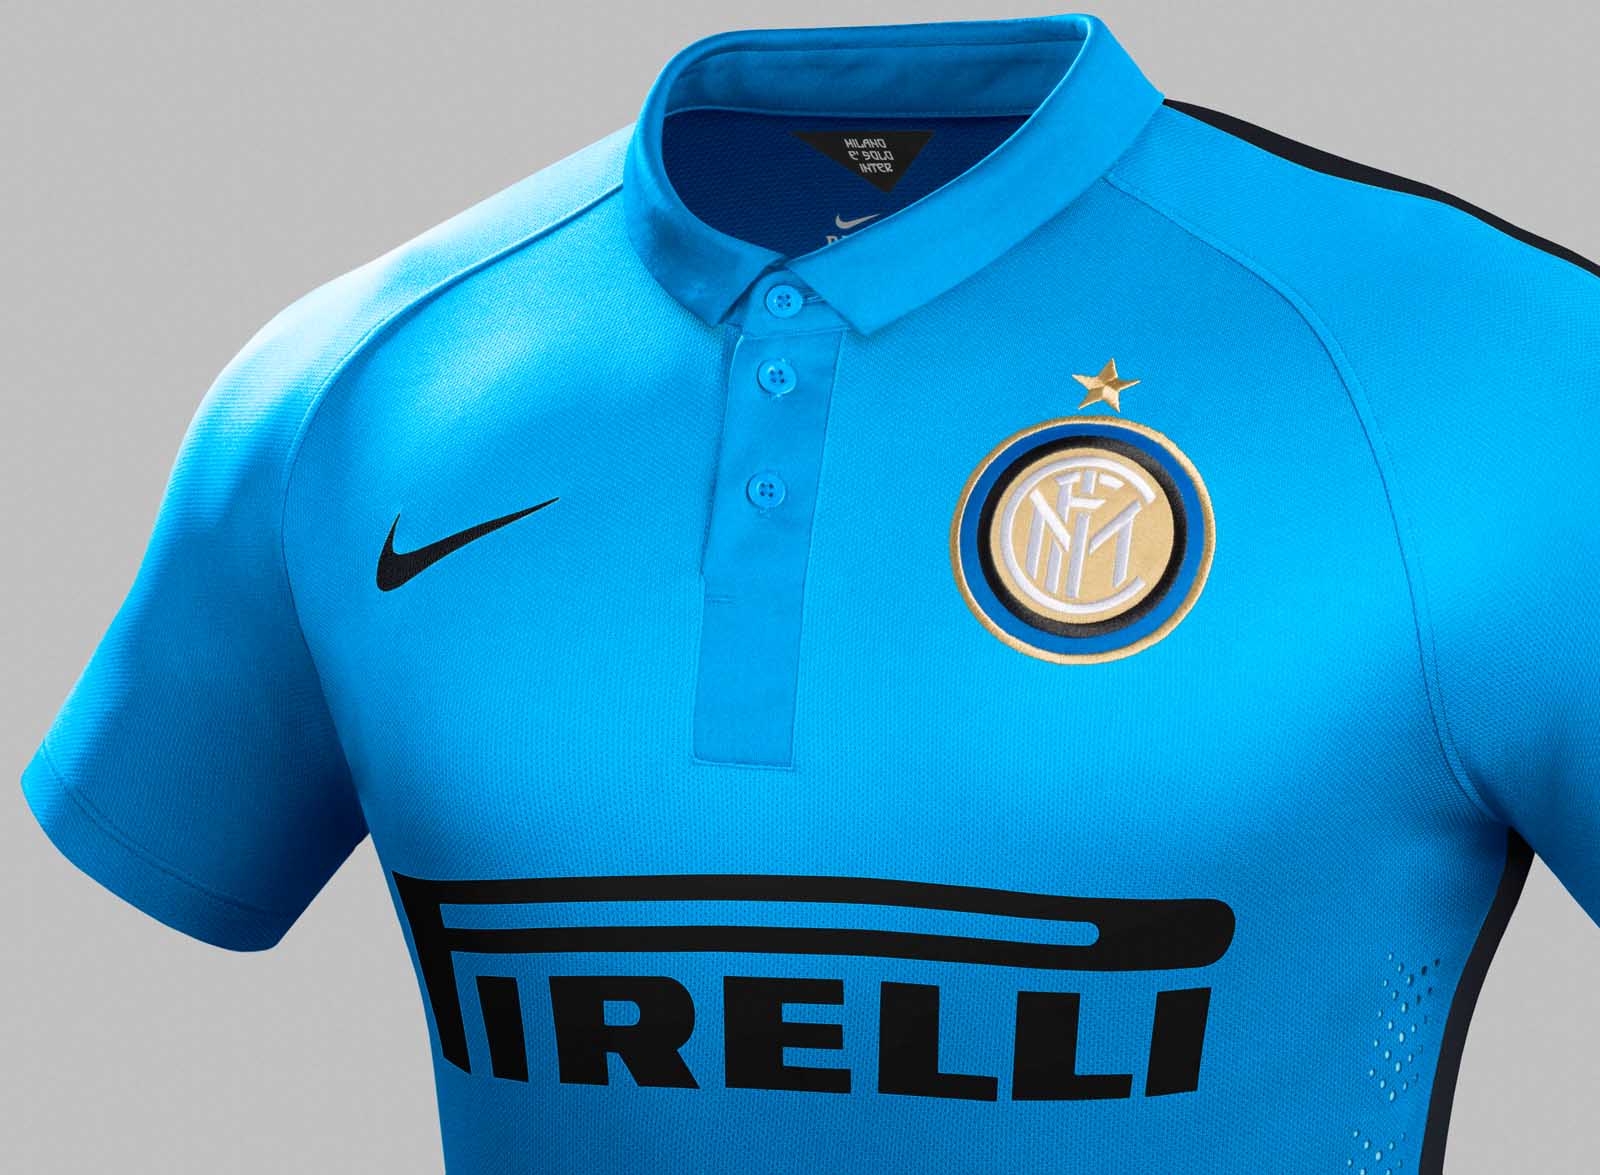 Inter's 3rd Kit for this campaign. Thoughts? : FCInterMilan